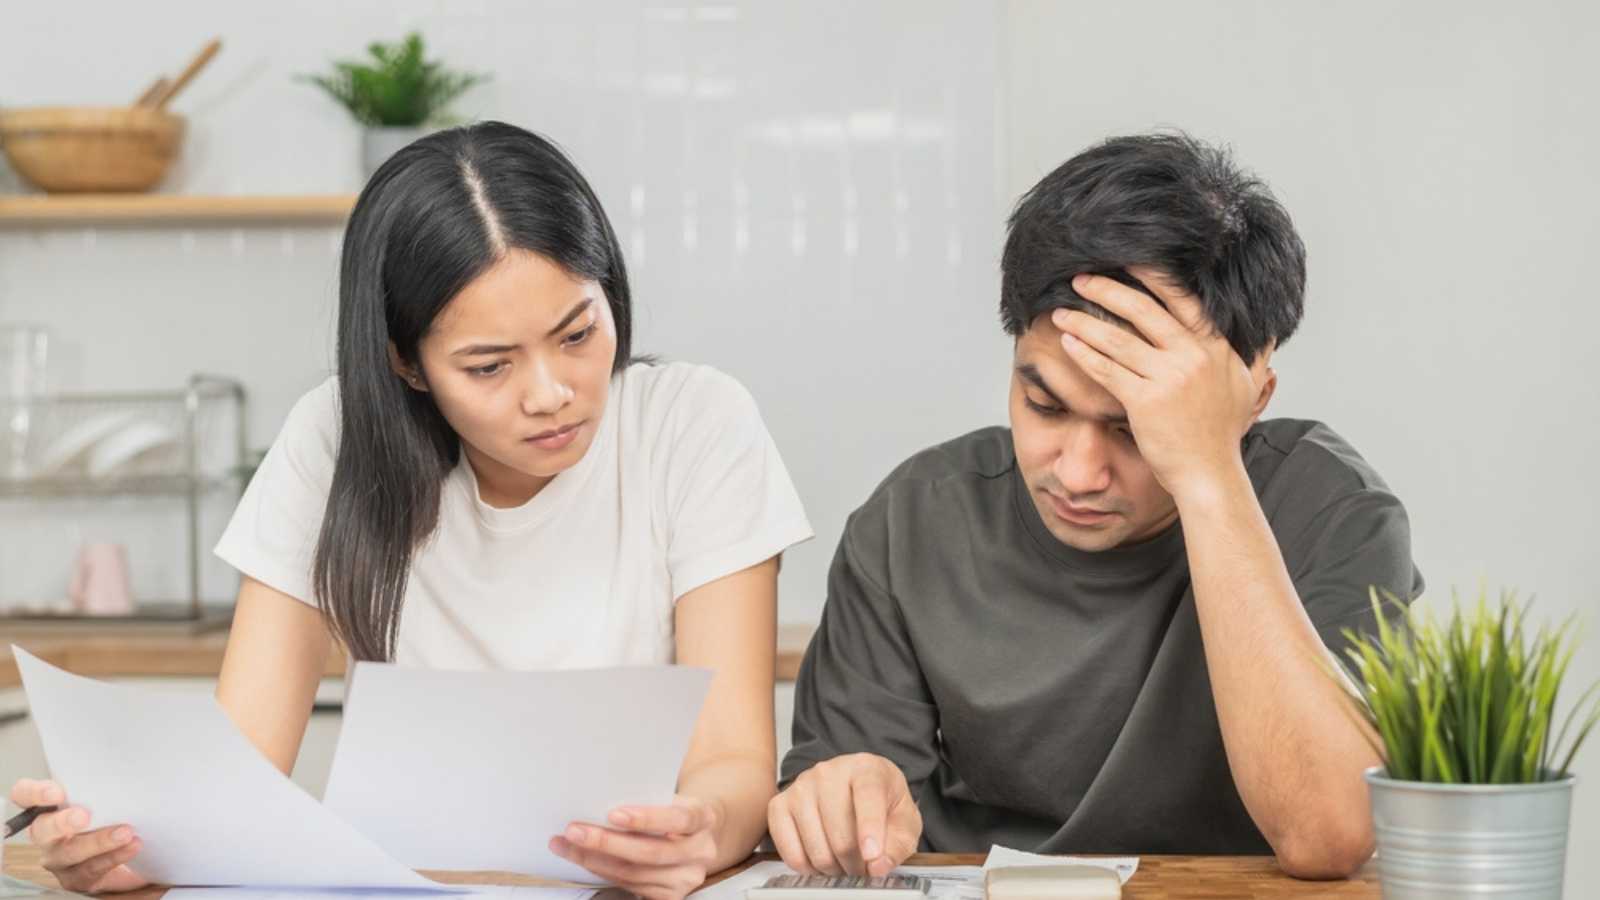 Couples stressed working on interest